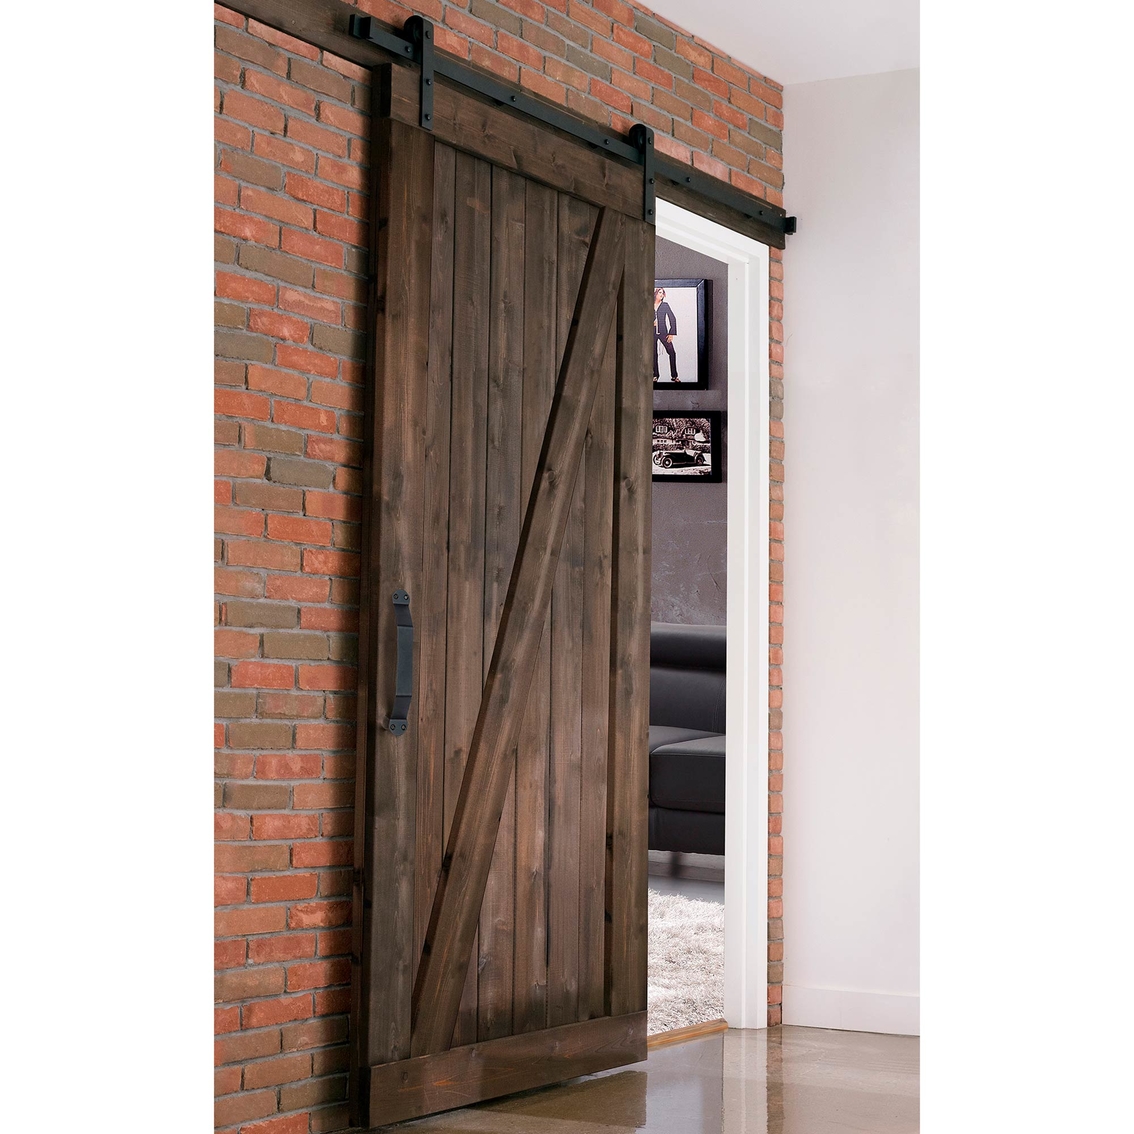 Merry Products Distressed Smoke Finish Farm Style Sliding Door - Image 2 of 5